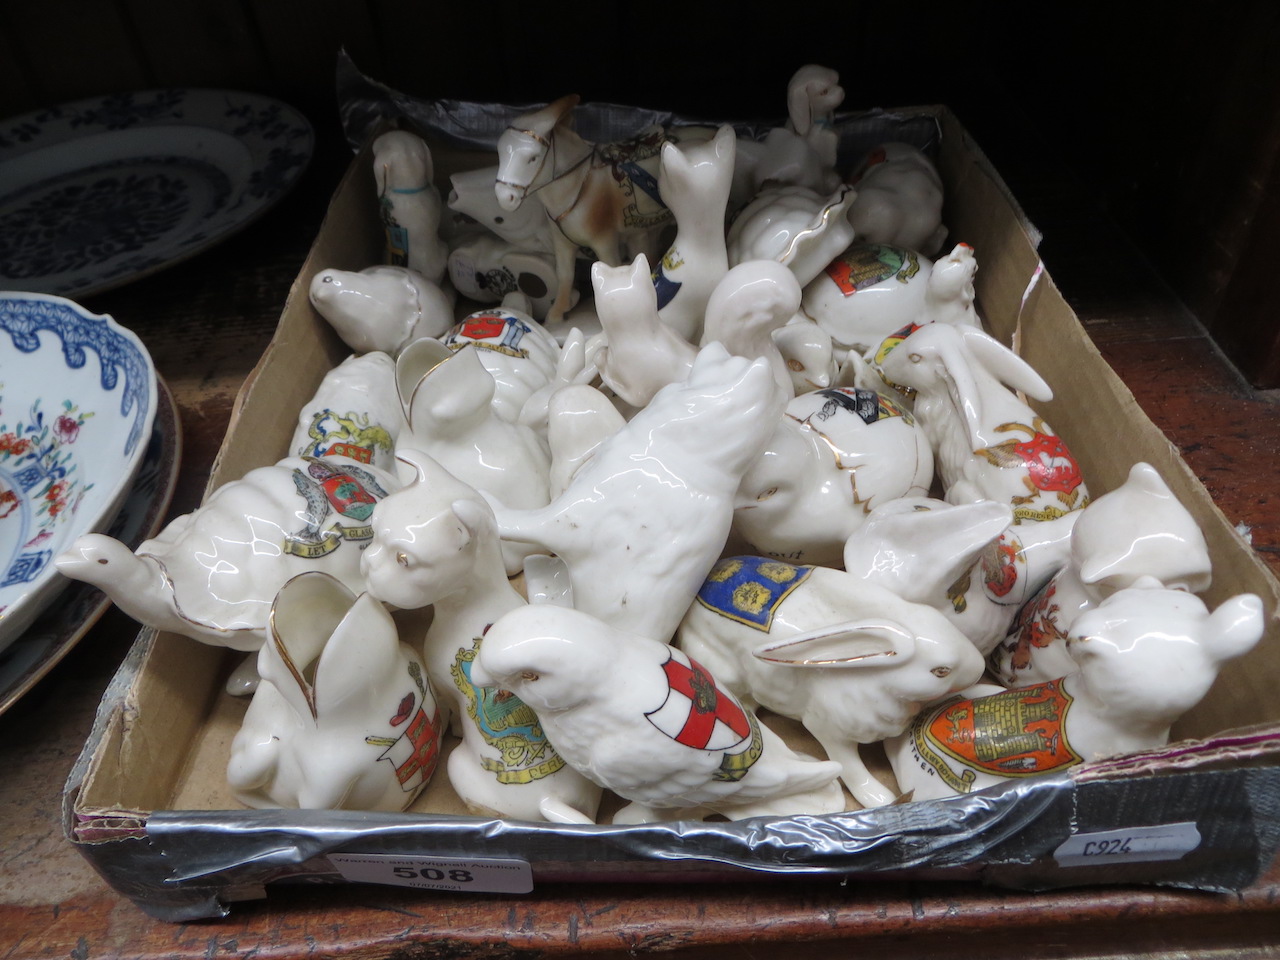 A tray of approx. 40 pieces of crested china